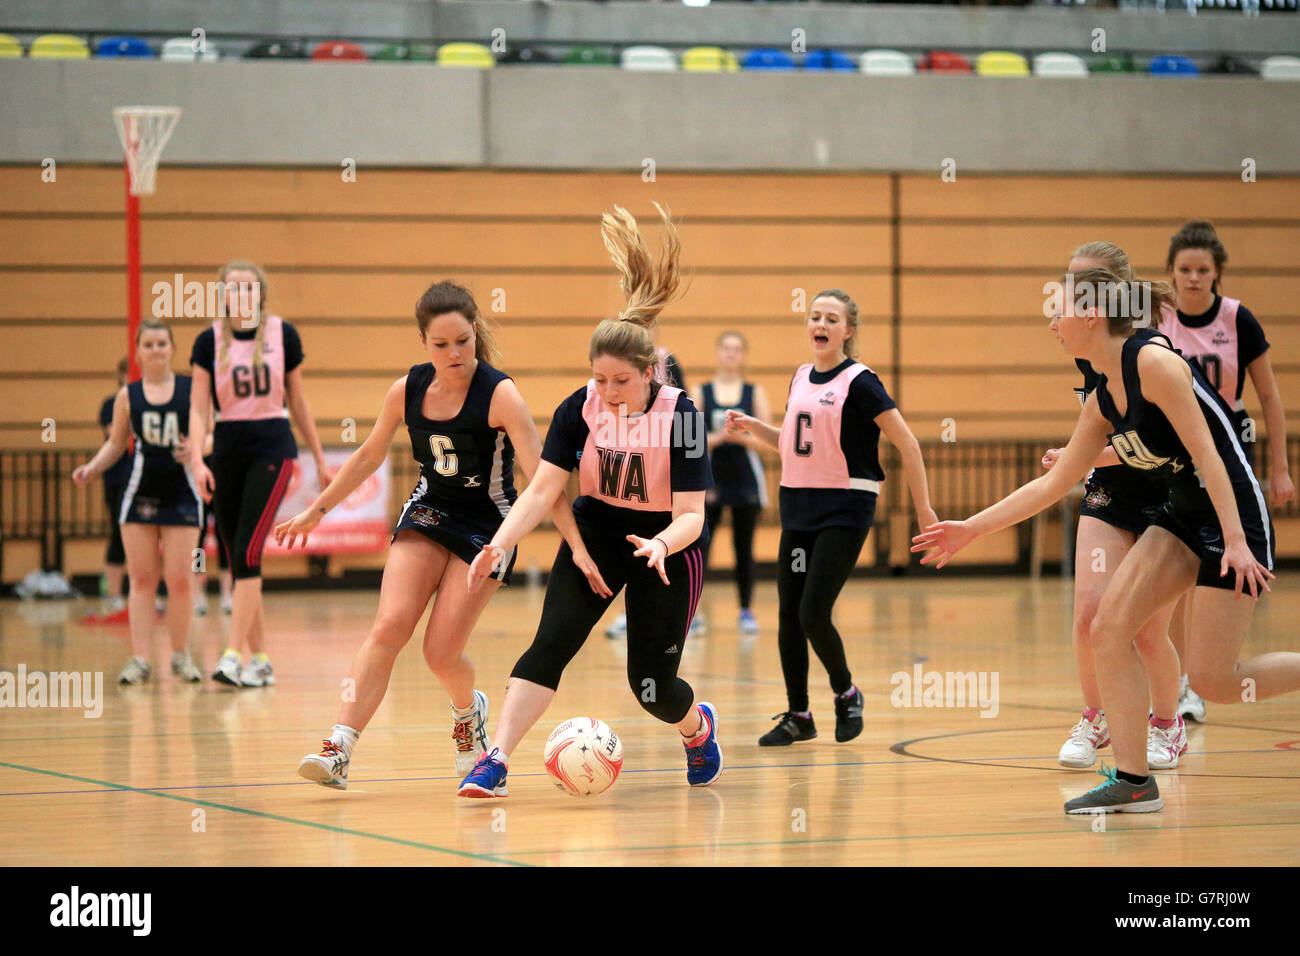 Images from the Netball in the City event at the Copper Box Arena, London Stock Photo